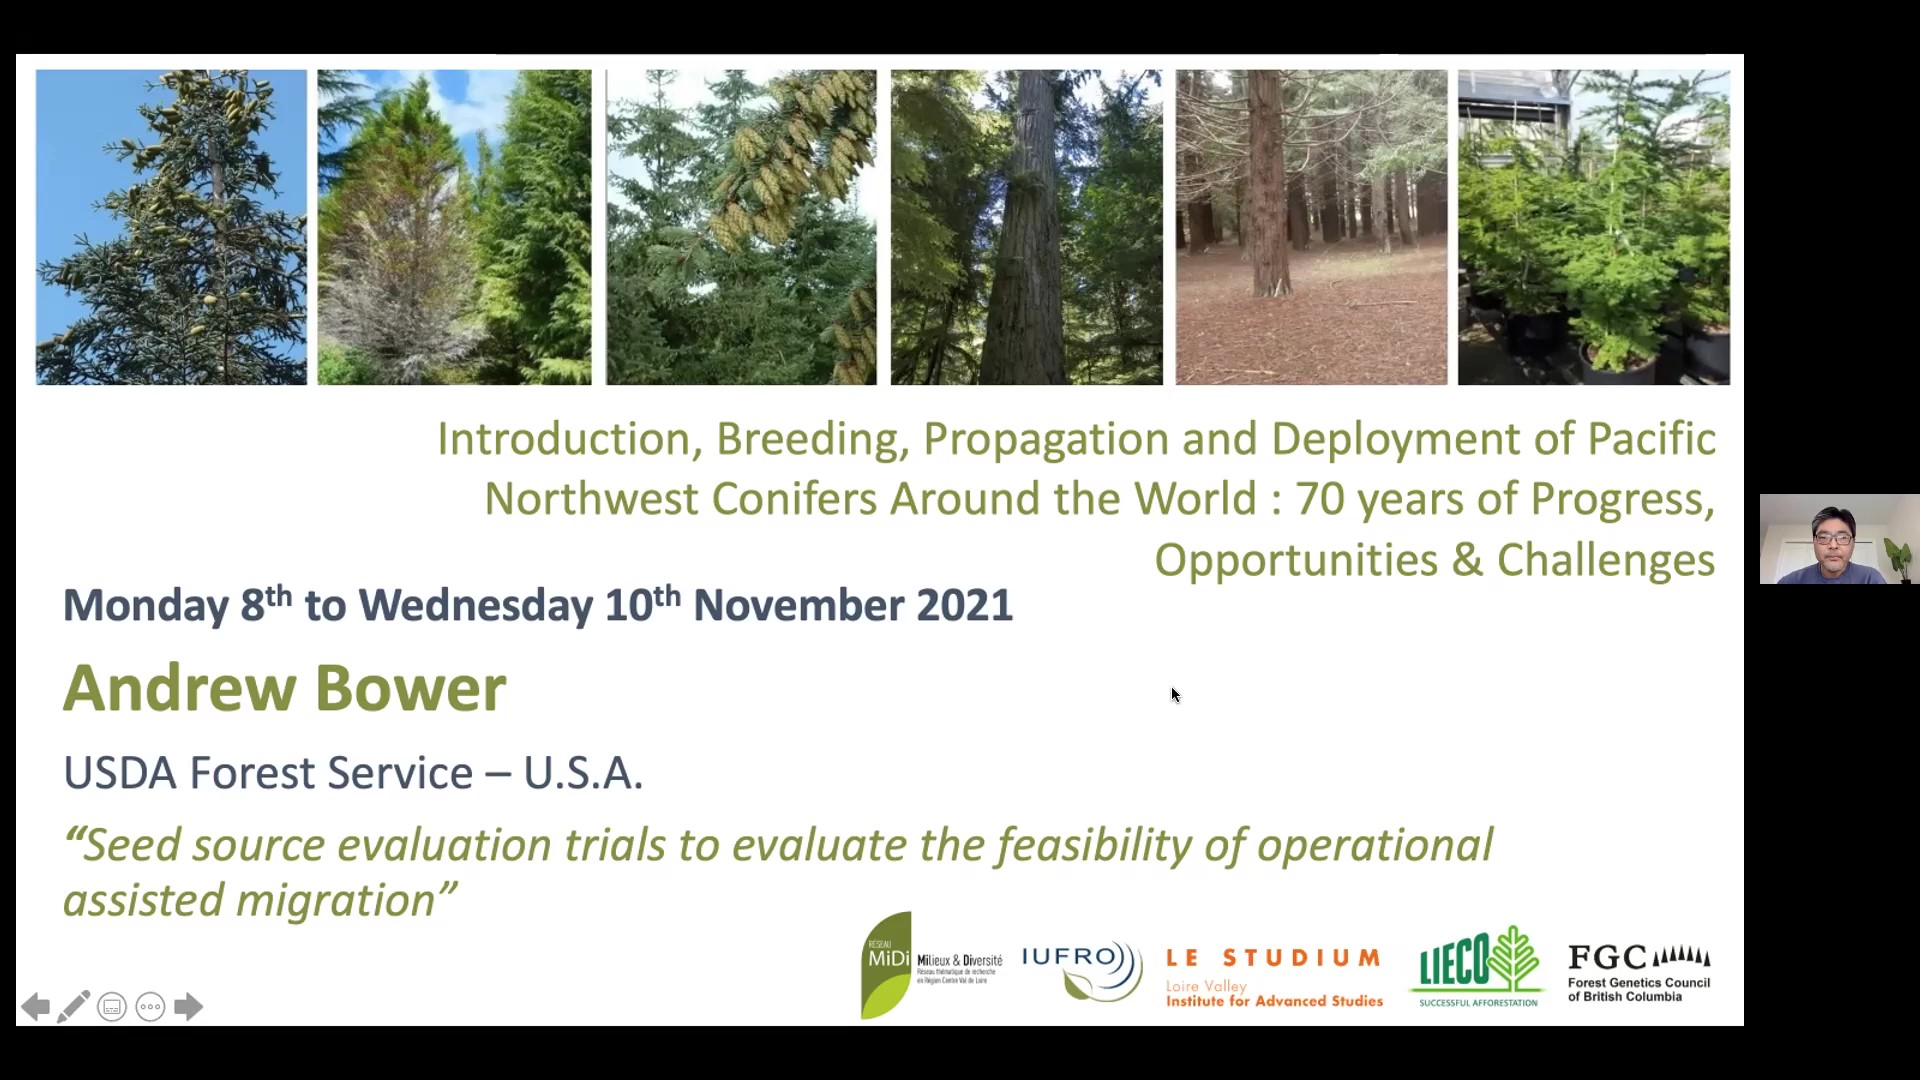 Two posters : Seed source evaluation trials to evaluate the feasibility of operational assisted migration /Establishment of white pine blister rust resistant seed orchards for whitebark pine in the 
Pacific Northwest - Andrew Bower